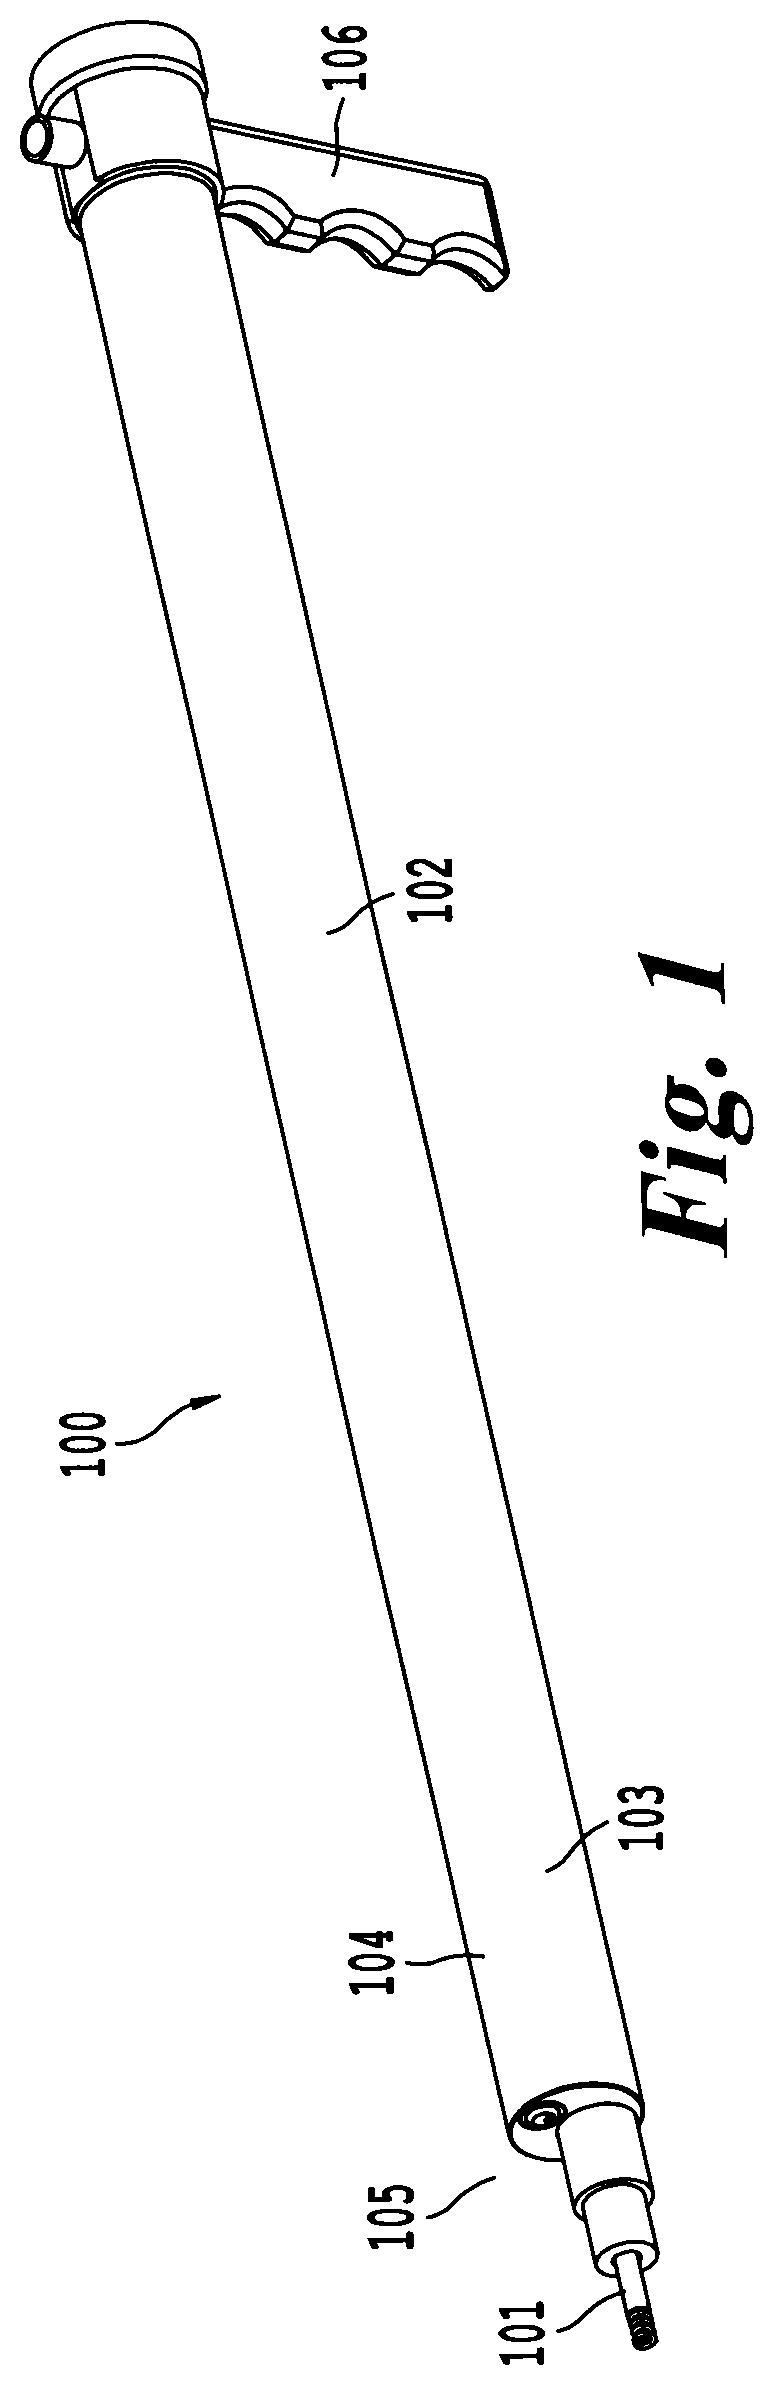 Delivery tool and method for devices in the pericardial space